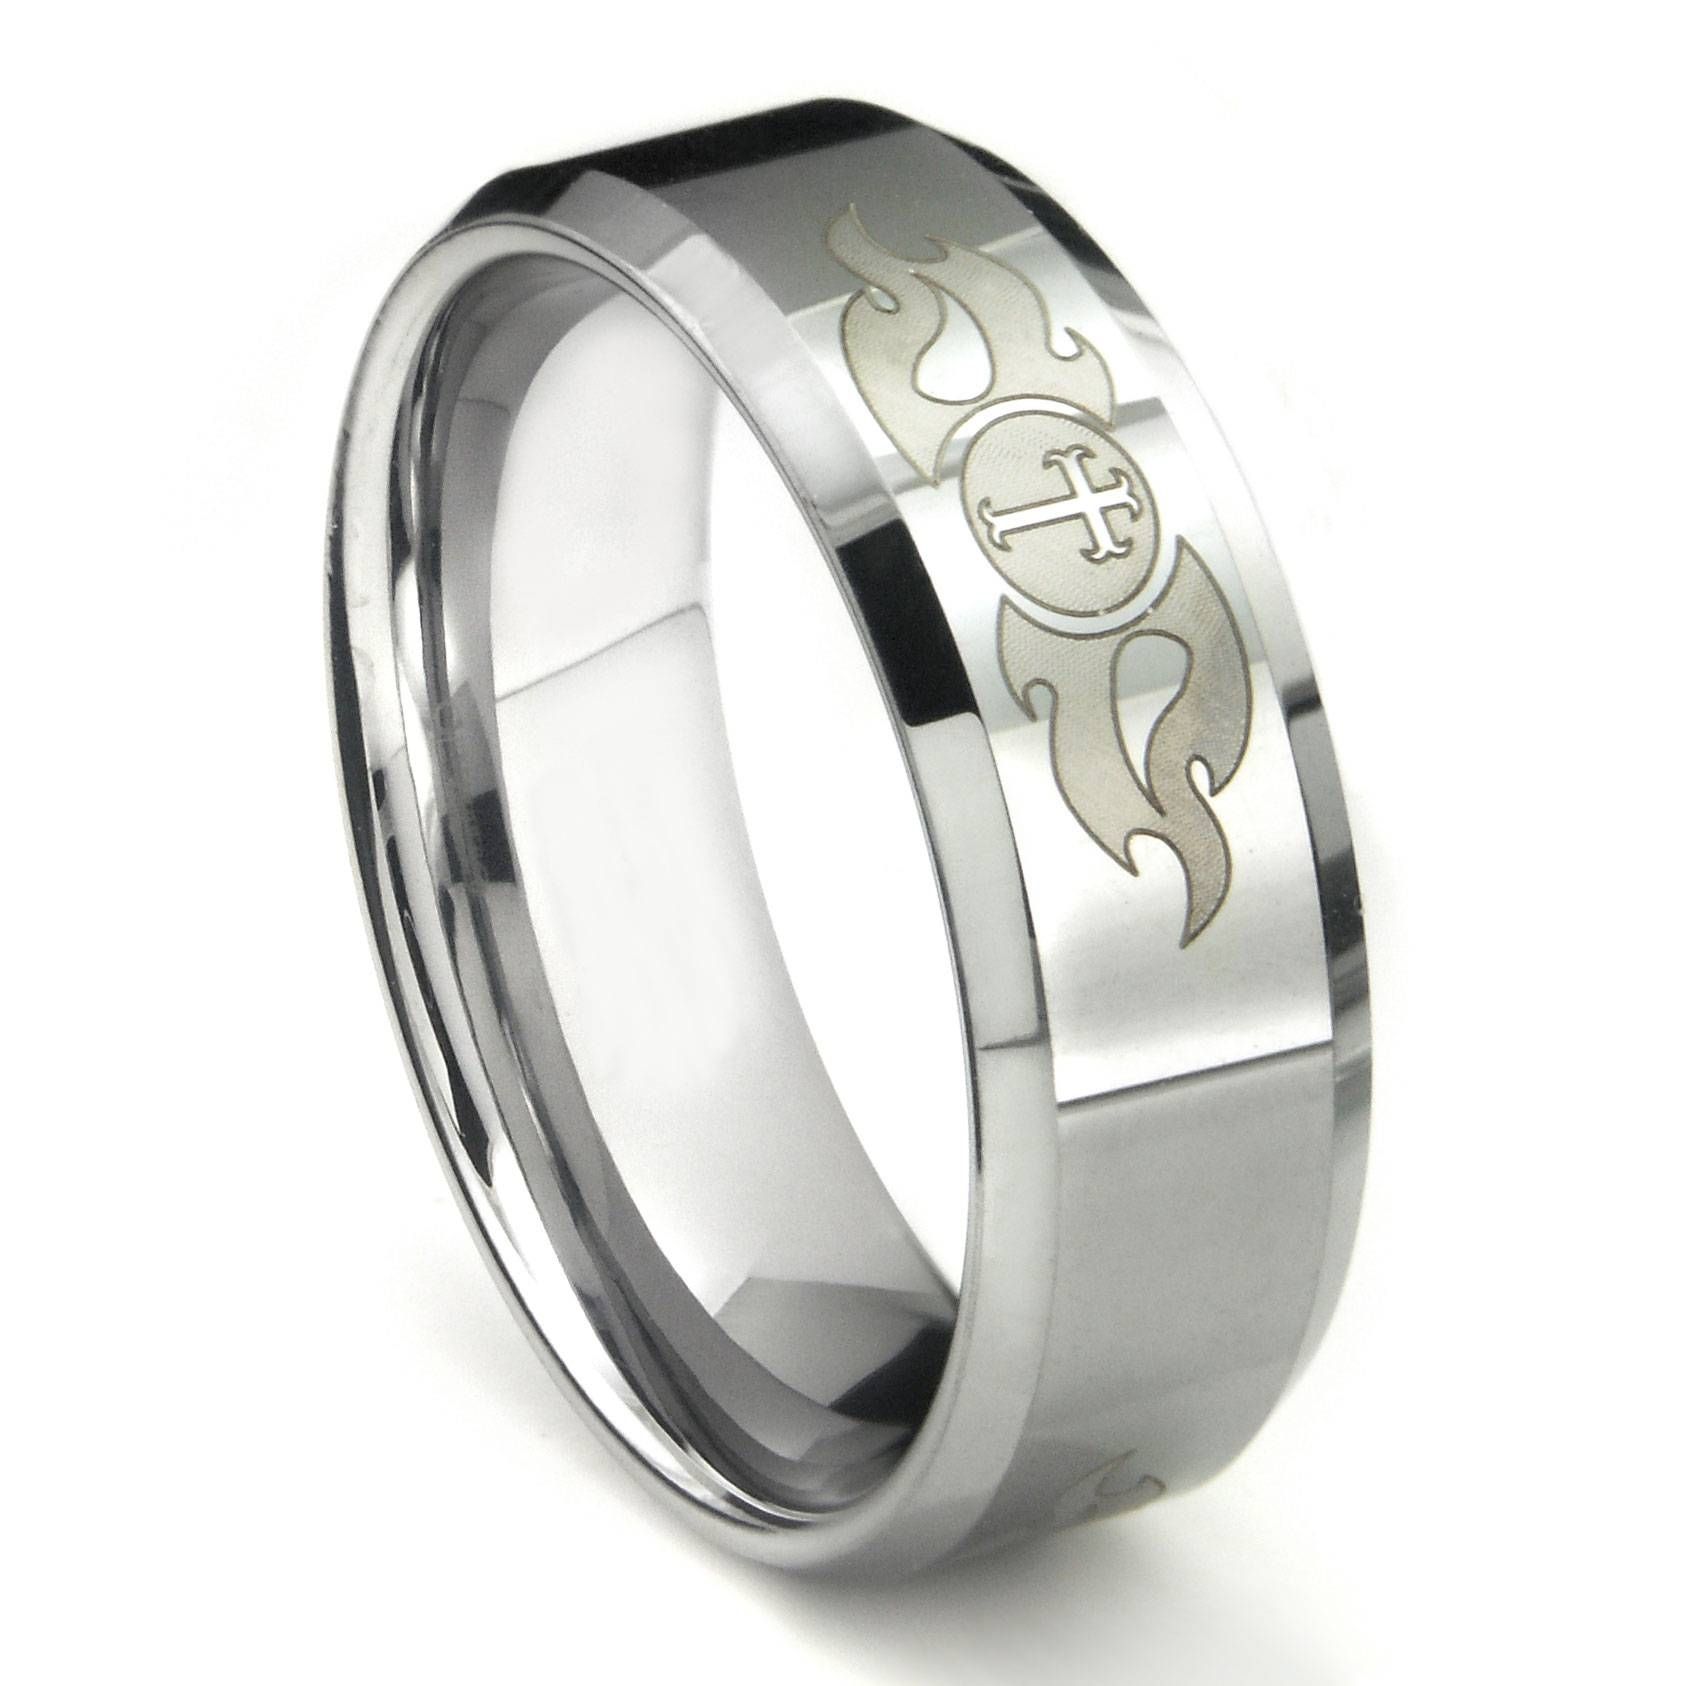 Tungsten Carbide Laser Engraved Fiery Cross Wedding Band Ring With Regard To Cross Wedding Rings (View 4 of 15)